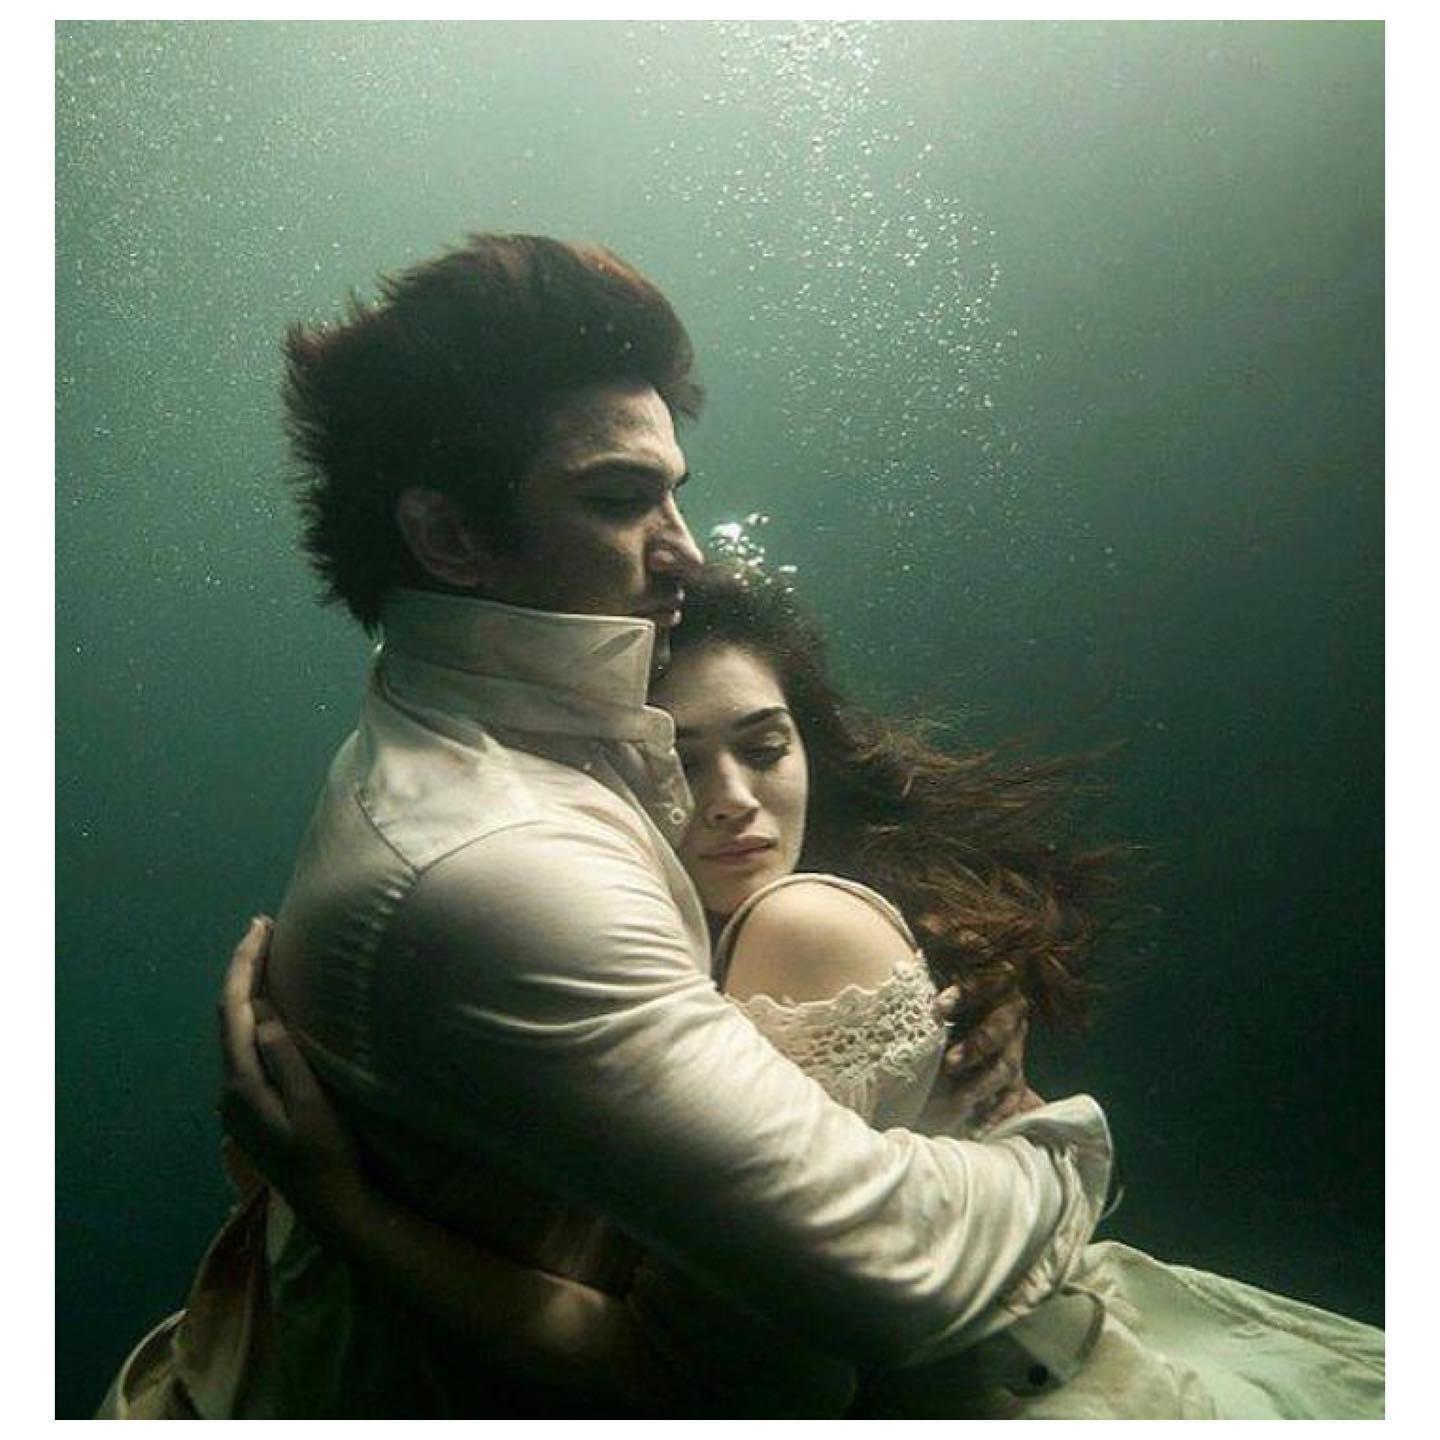 A heartbreaking moment for fans and the nation alike, on Sushant Singh Rajput's demise, Kriti Sanon shared this aching moment and wrenched her heart out and wrote- 